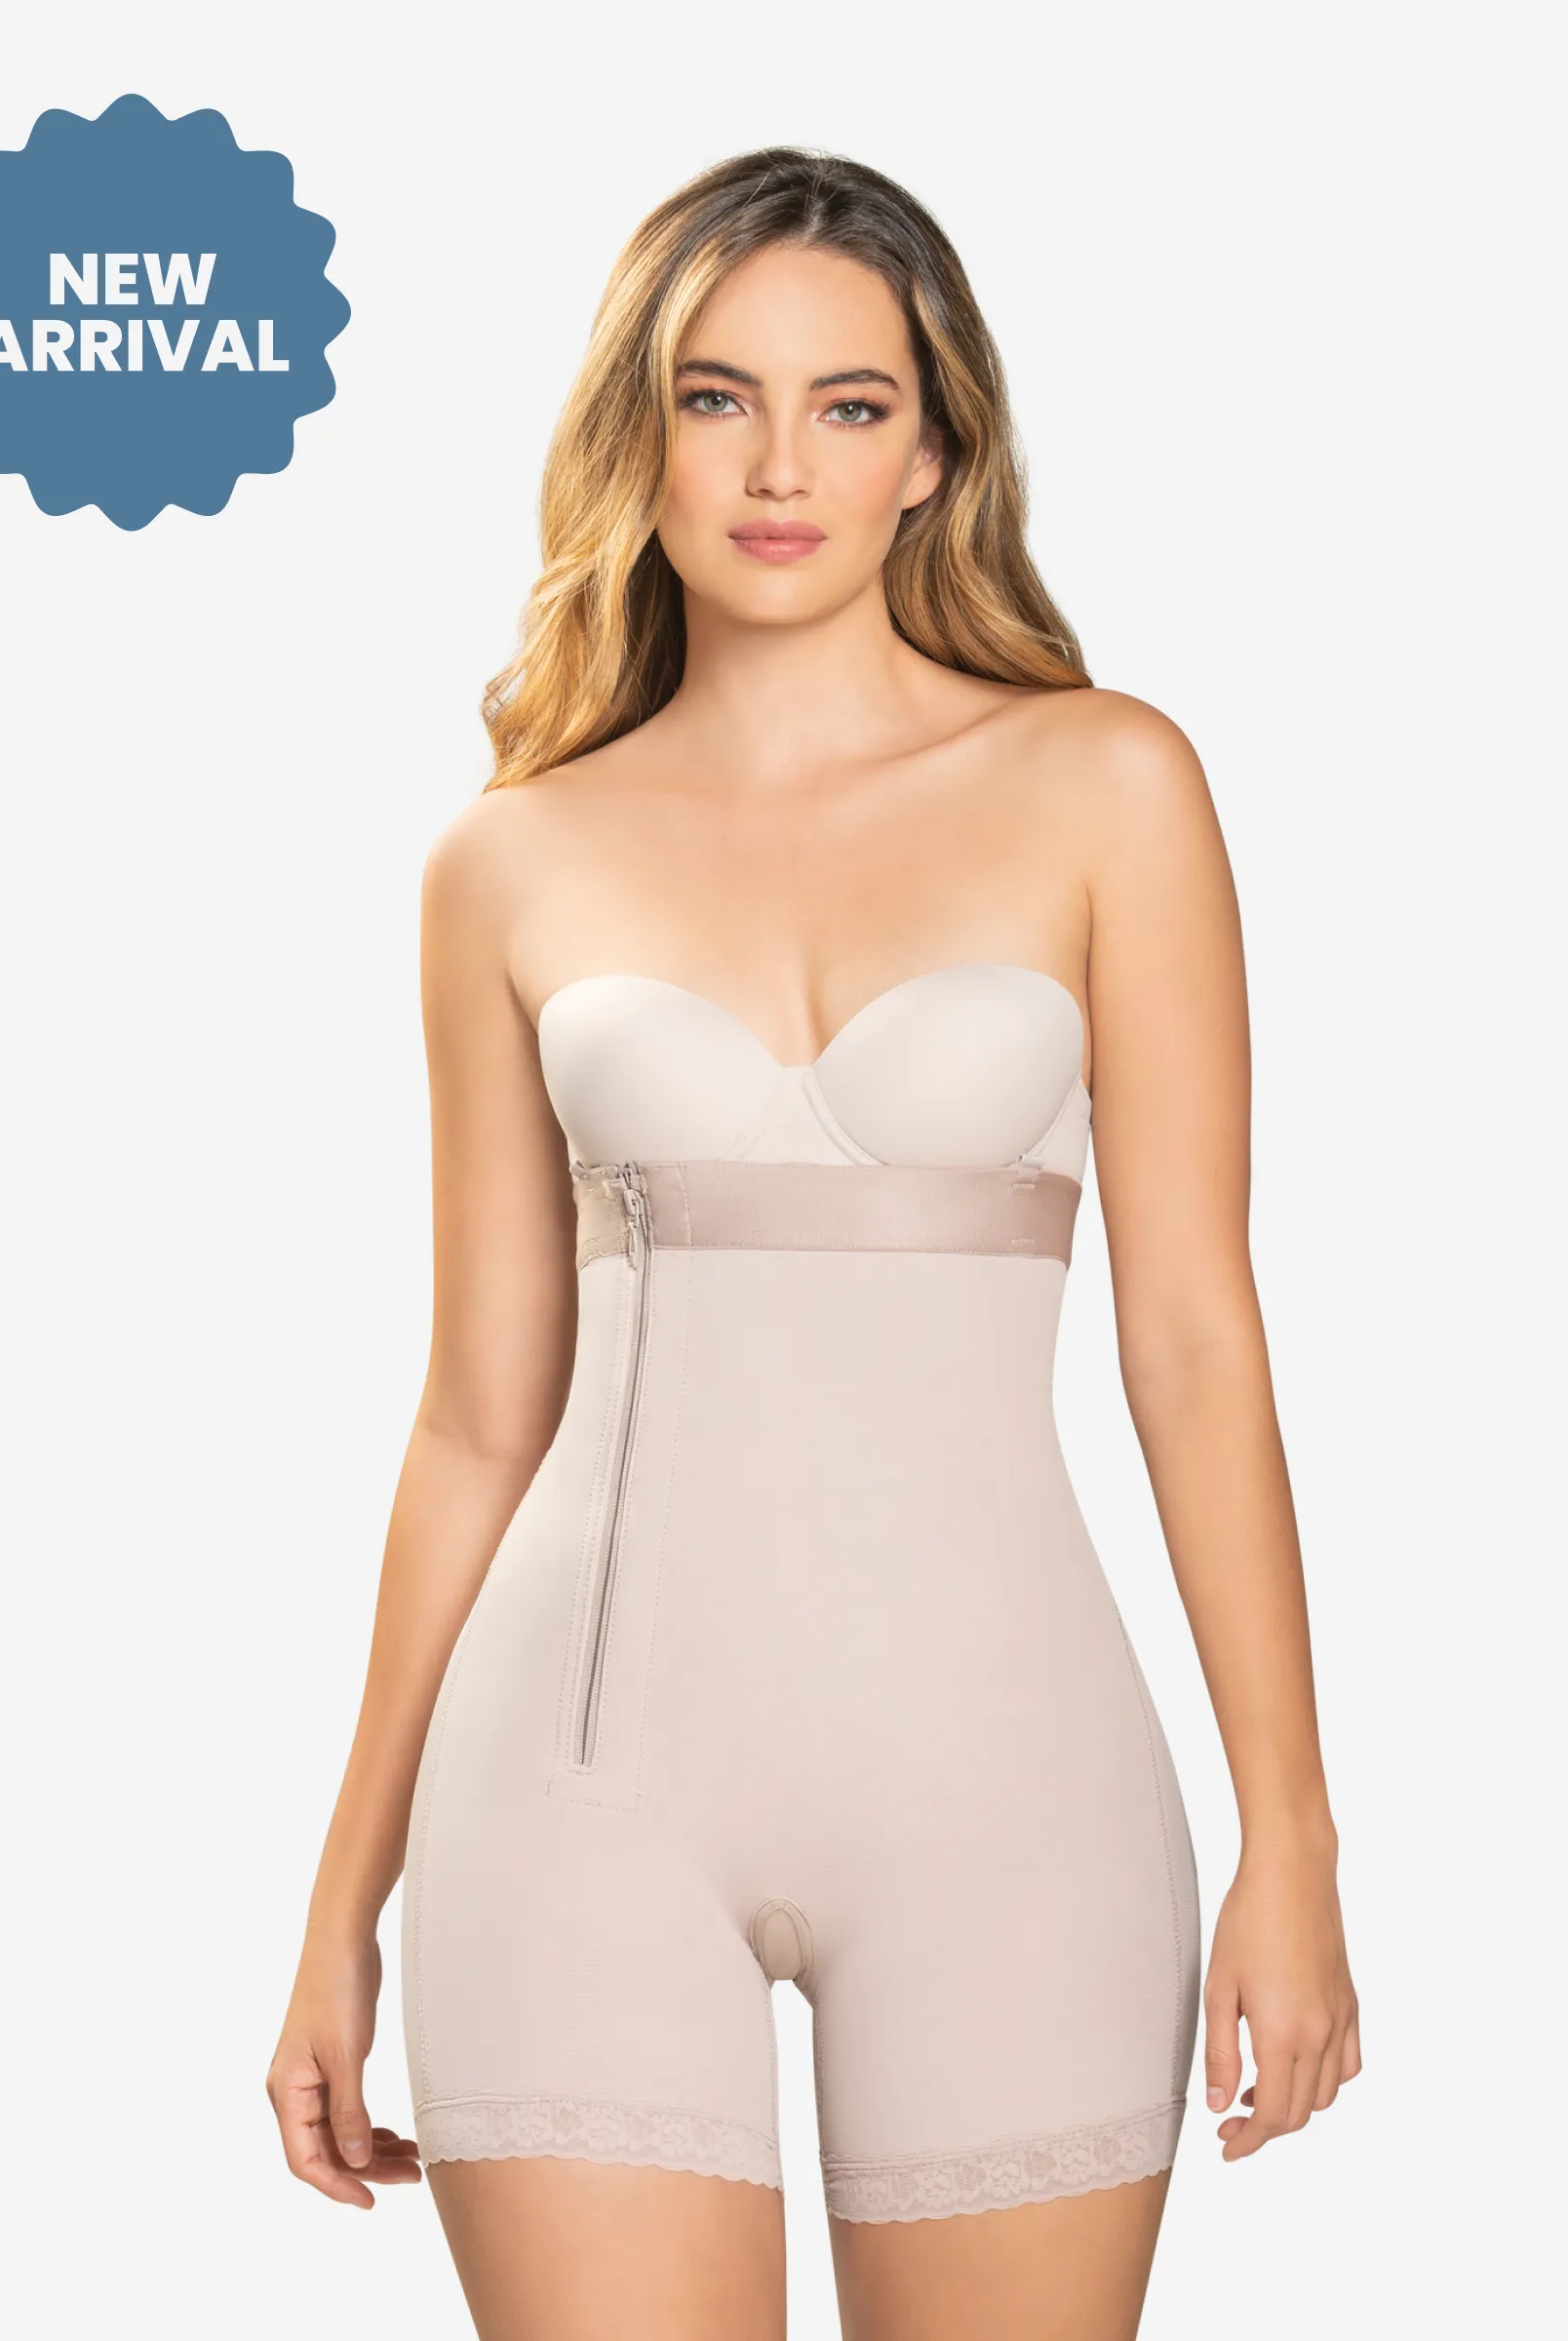 ShapewearUSA on X: 💪Transform your body with the best CYSM shapewear!  👉Shop now at  #shapewearusa #cysmshapewear  #bodytransformation #womensfashion #bodysuit  / X